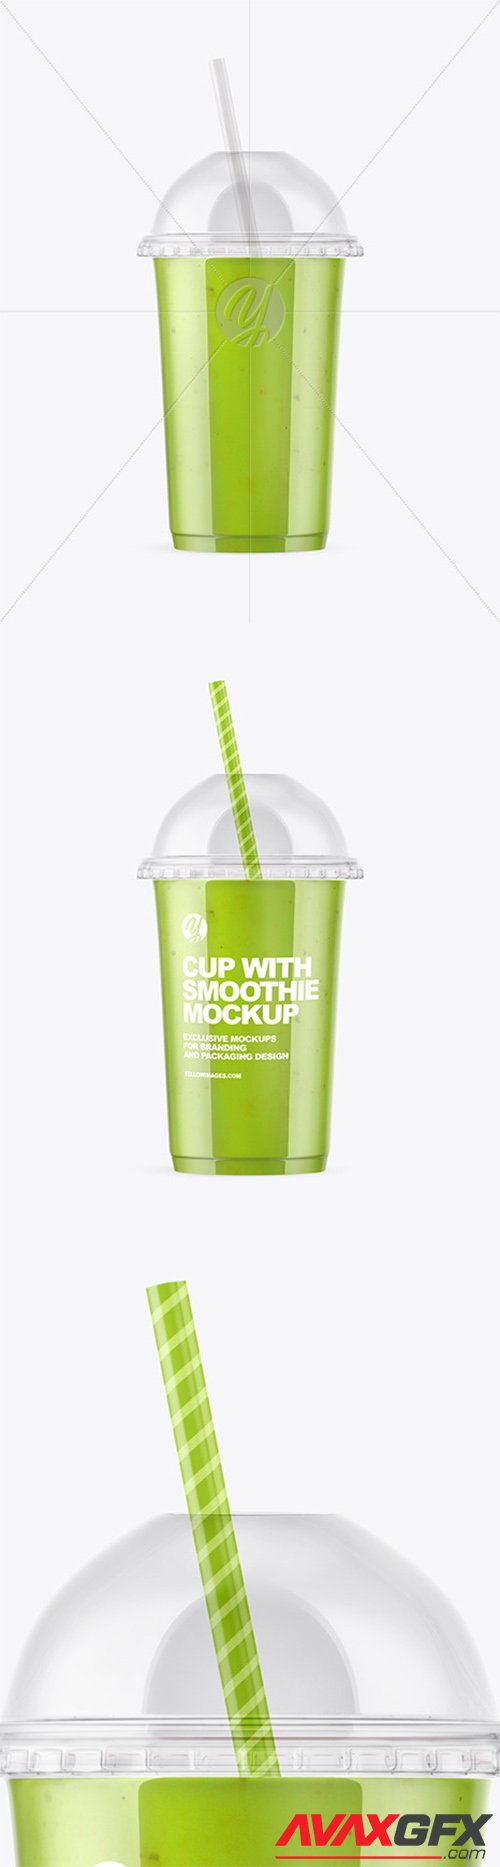 Green Smoothie Cup with Transparent Cap Mockup 61188